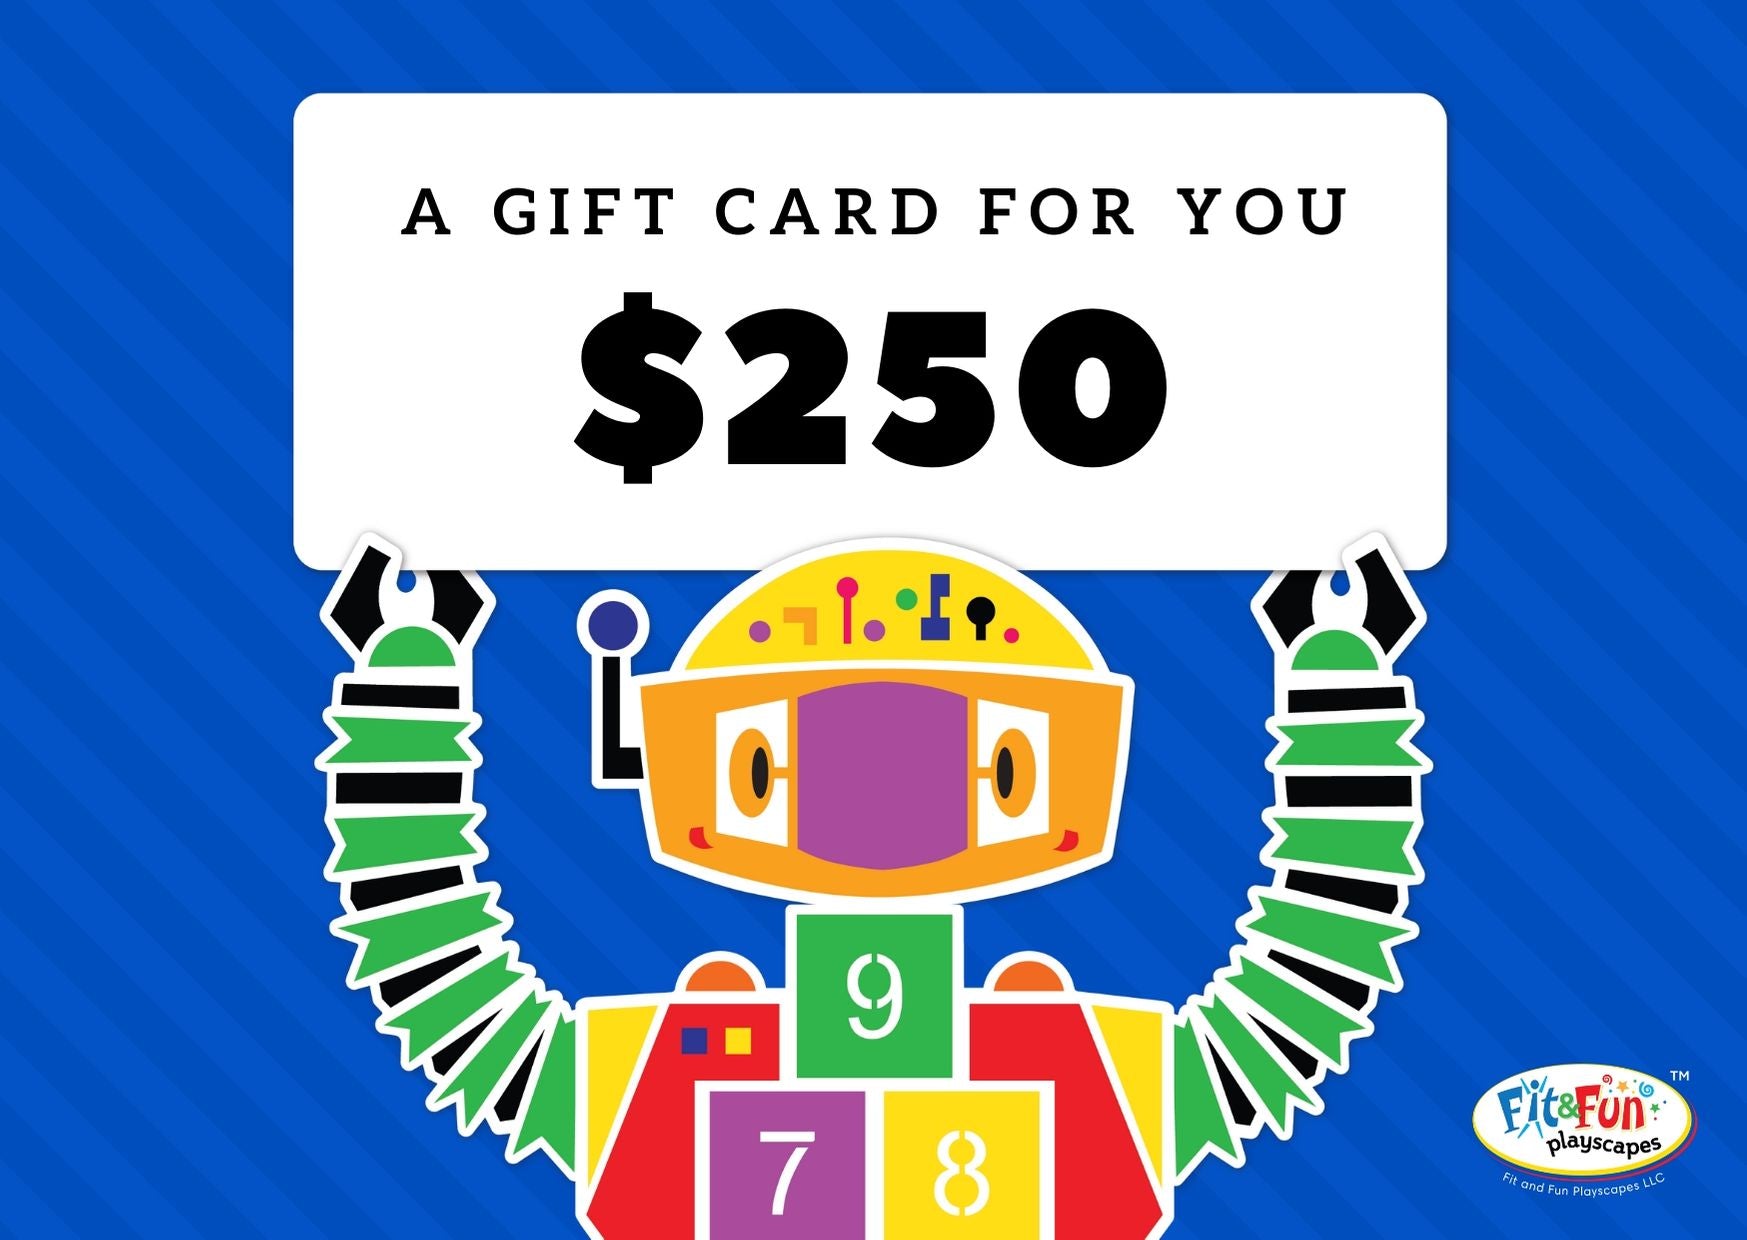 Gift Card - Fit and Fun Playscapes LLC